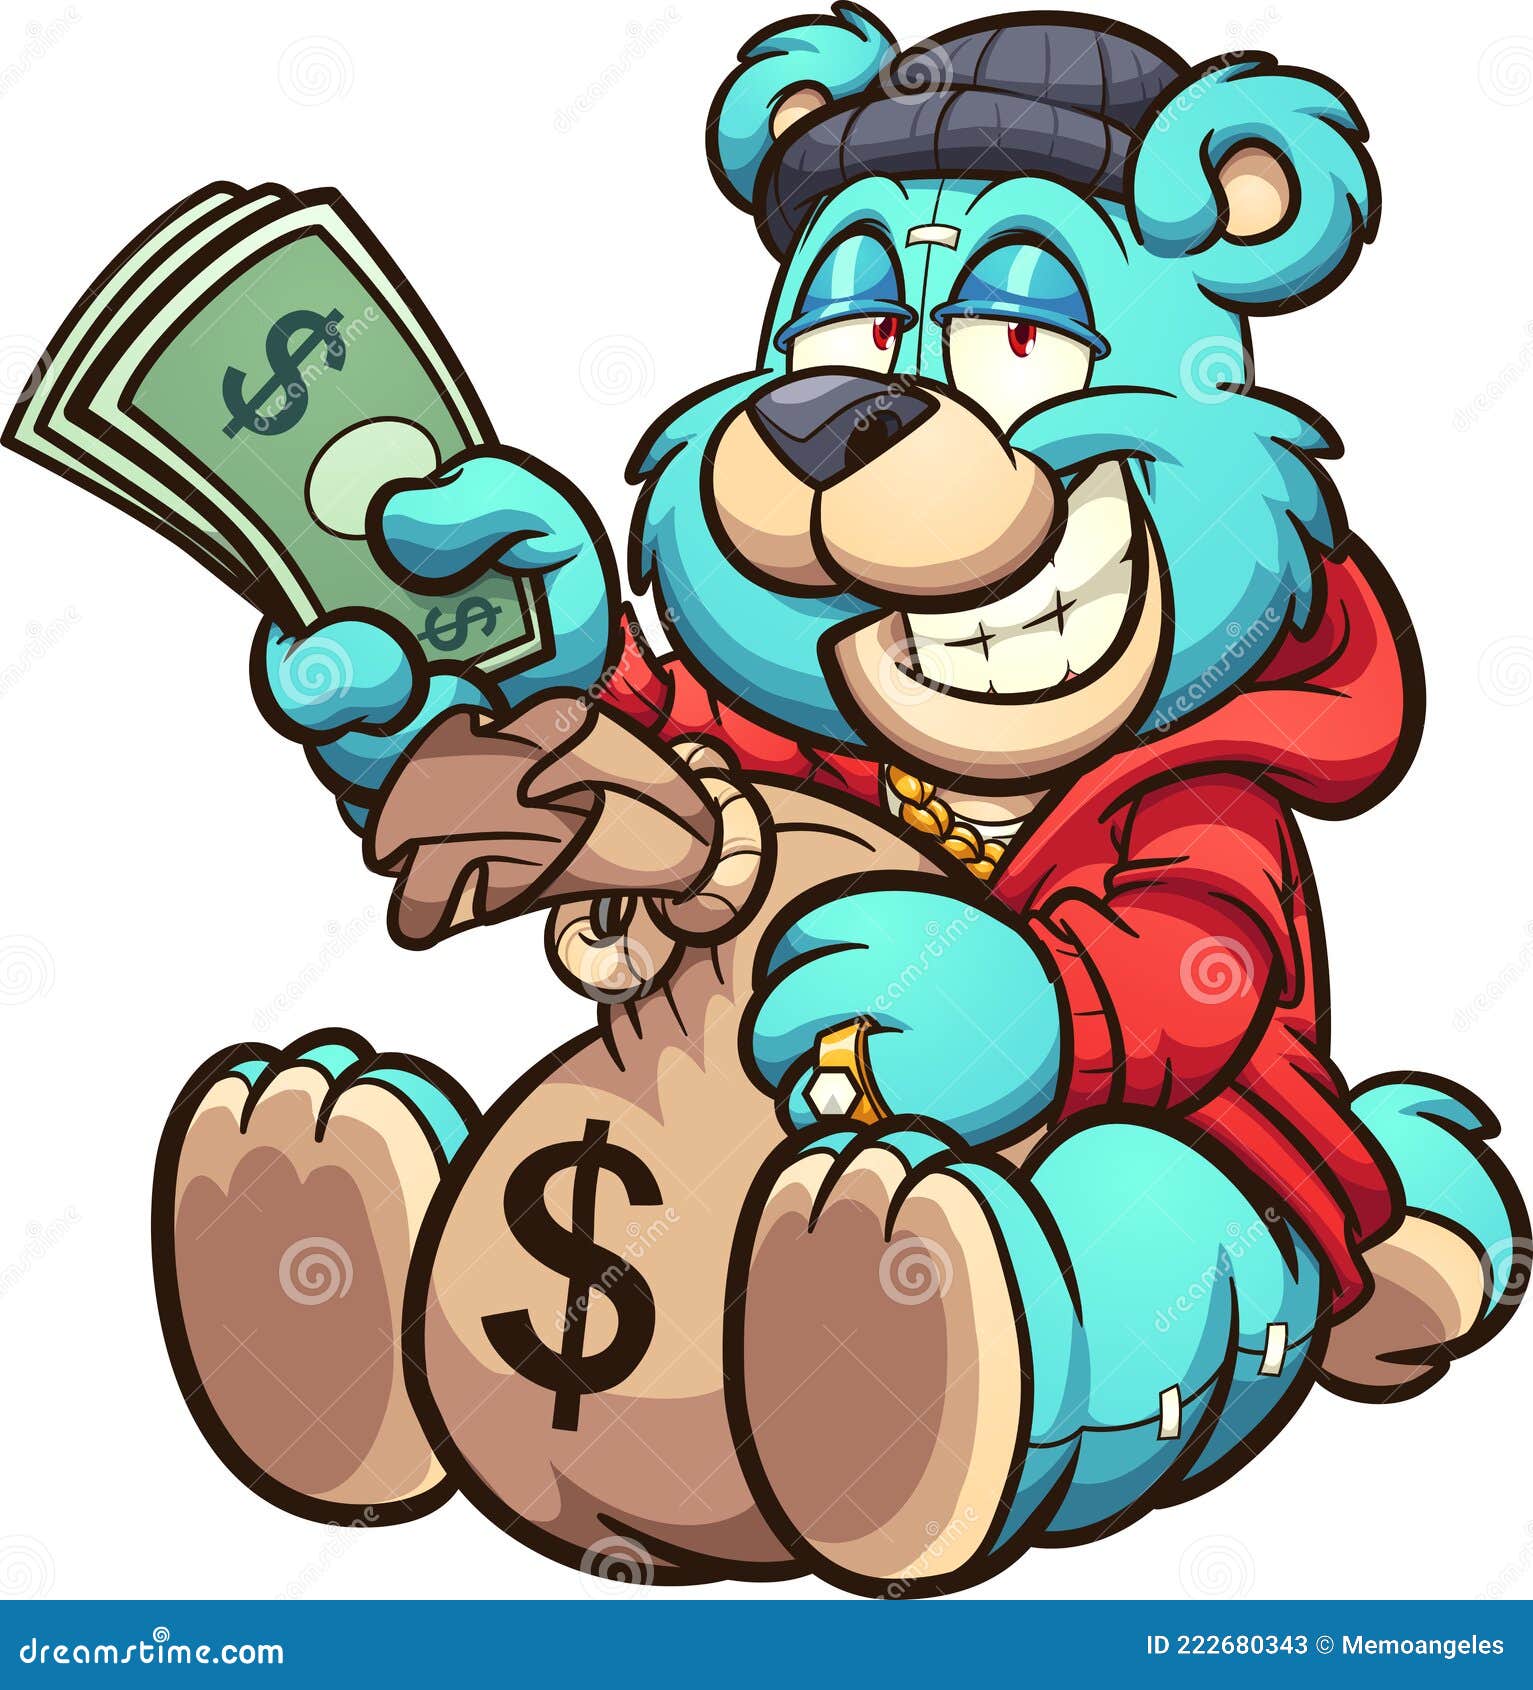 teddy bear holding a big bag of money and some bills.